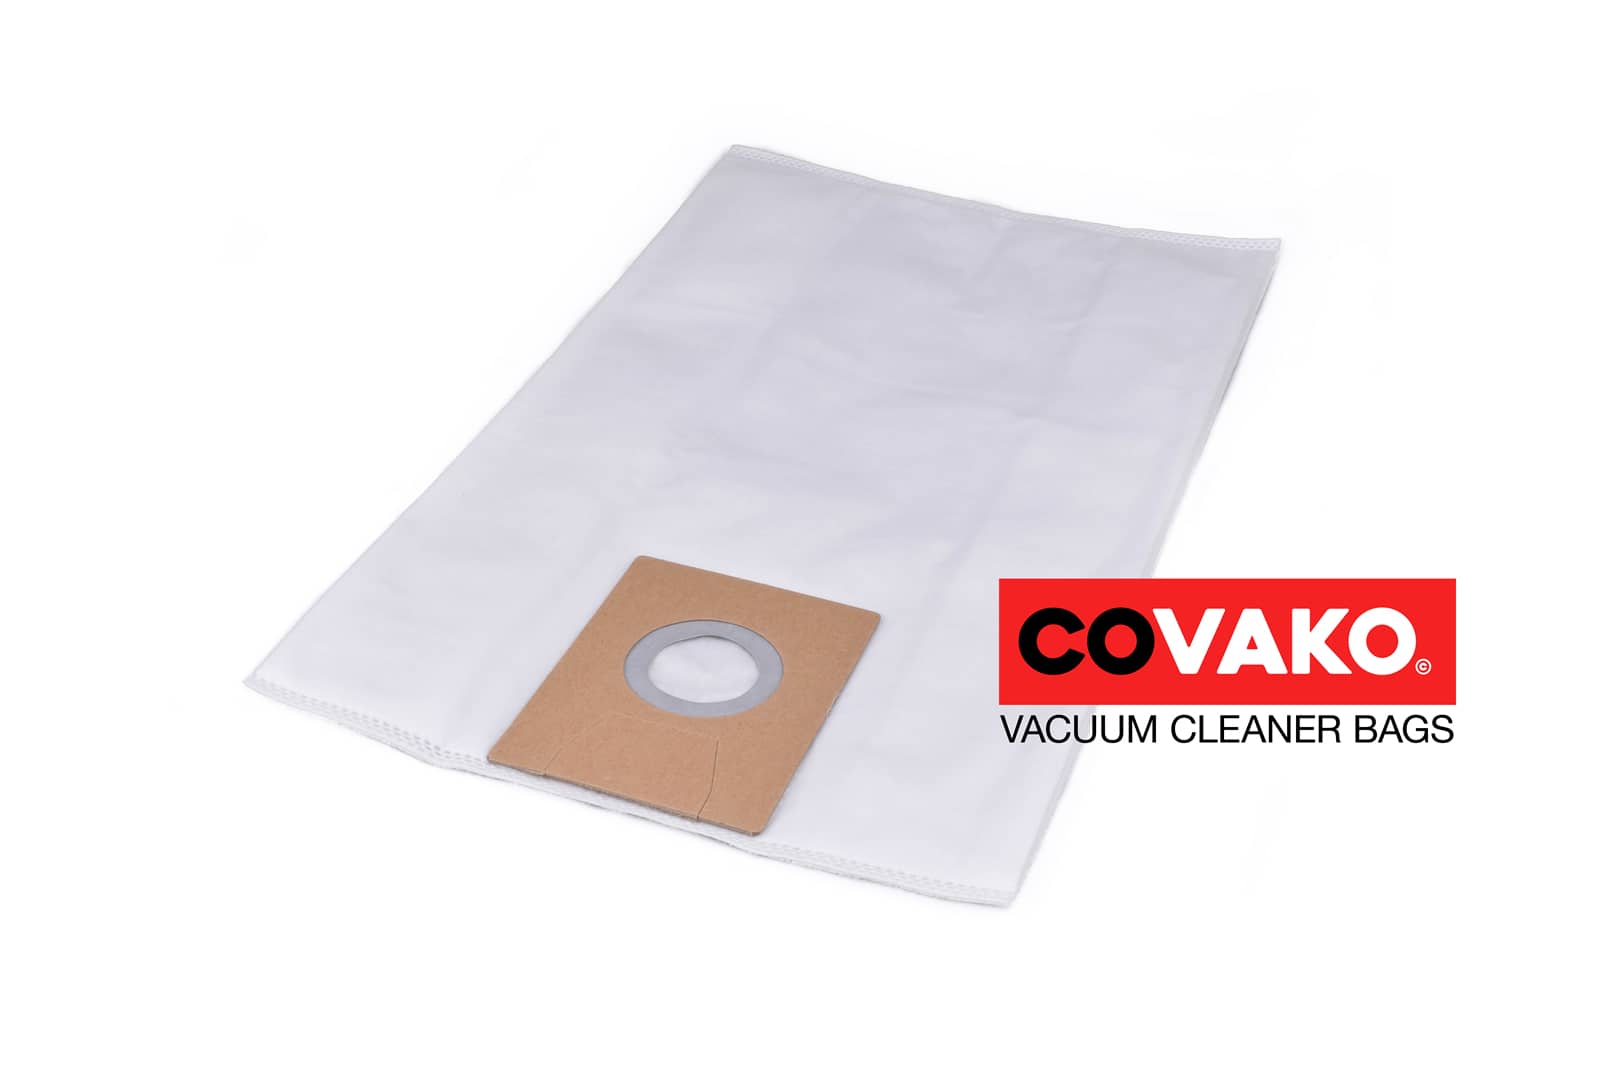 Nilco GS 1700 / Synthesis - Nilco vacuum cleaner bags